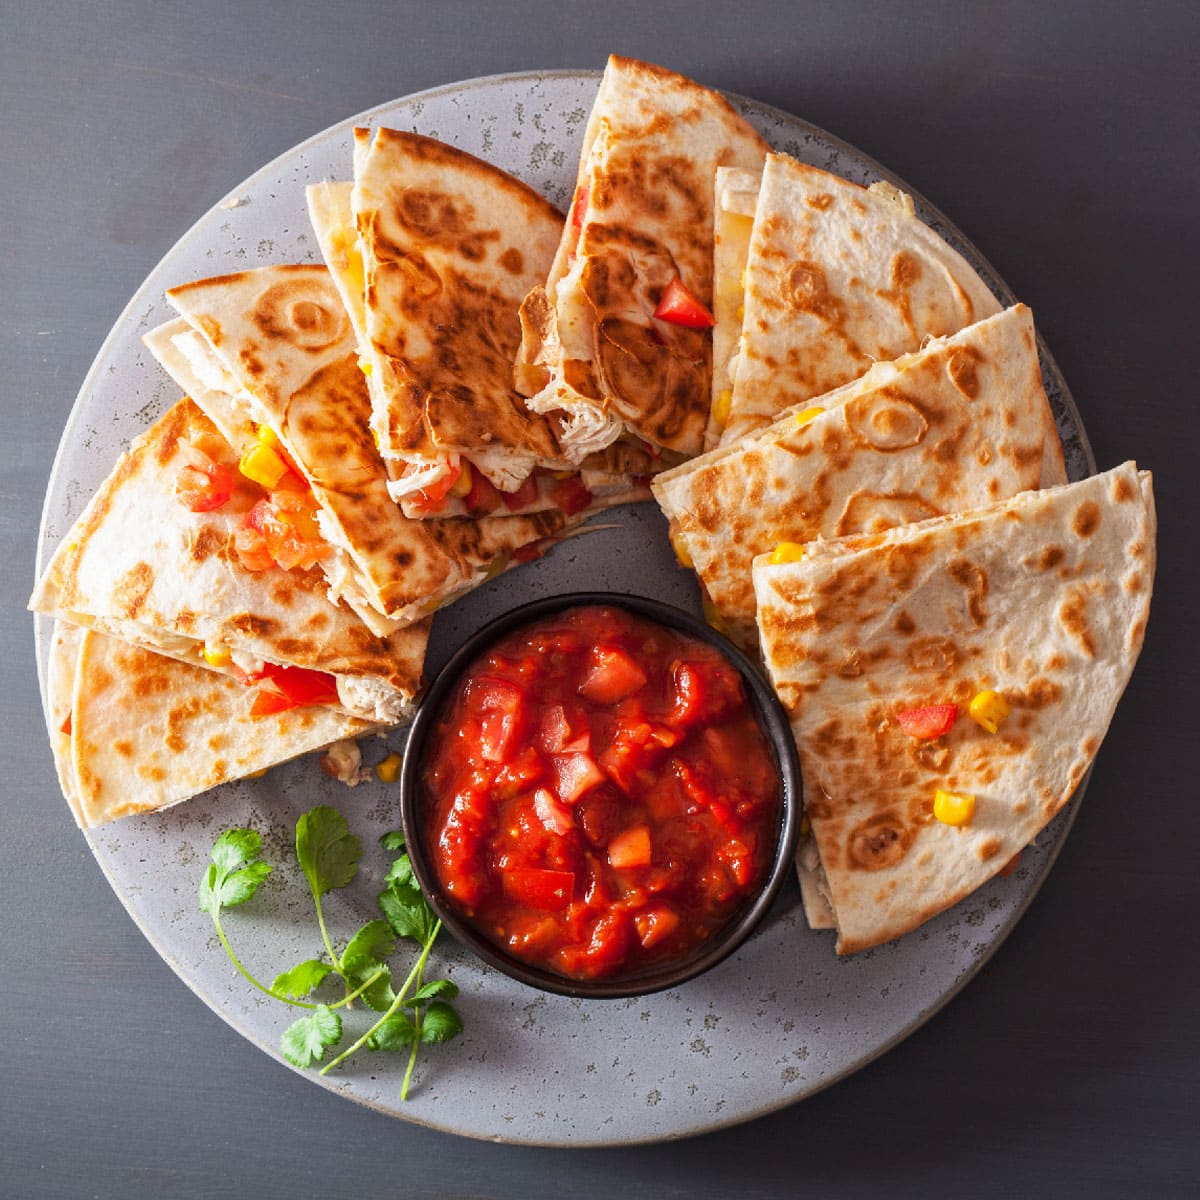 When it comes to Mexican cuisine, two popular items always seem to be up for debate: fajitas and quesadillas. Both are tasty options, but which one is better?